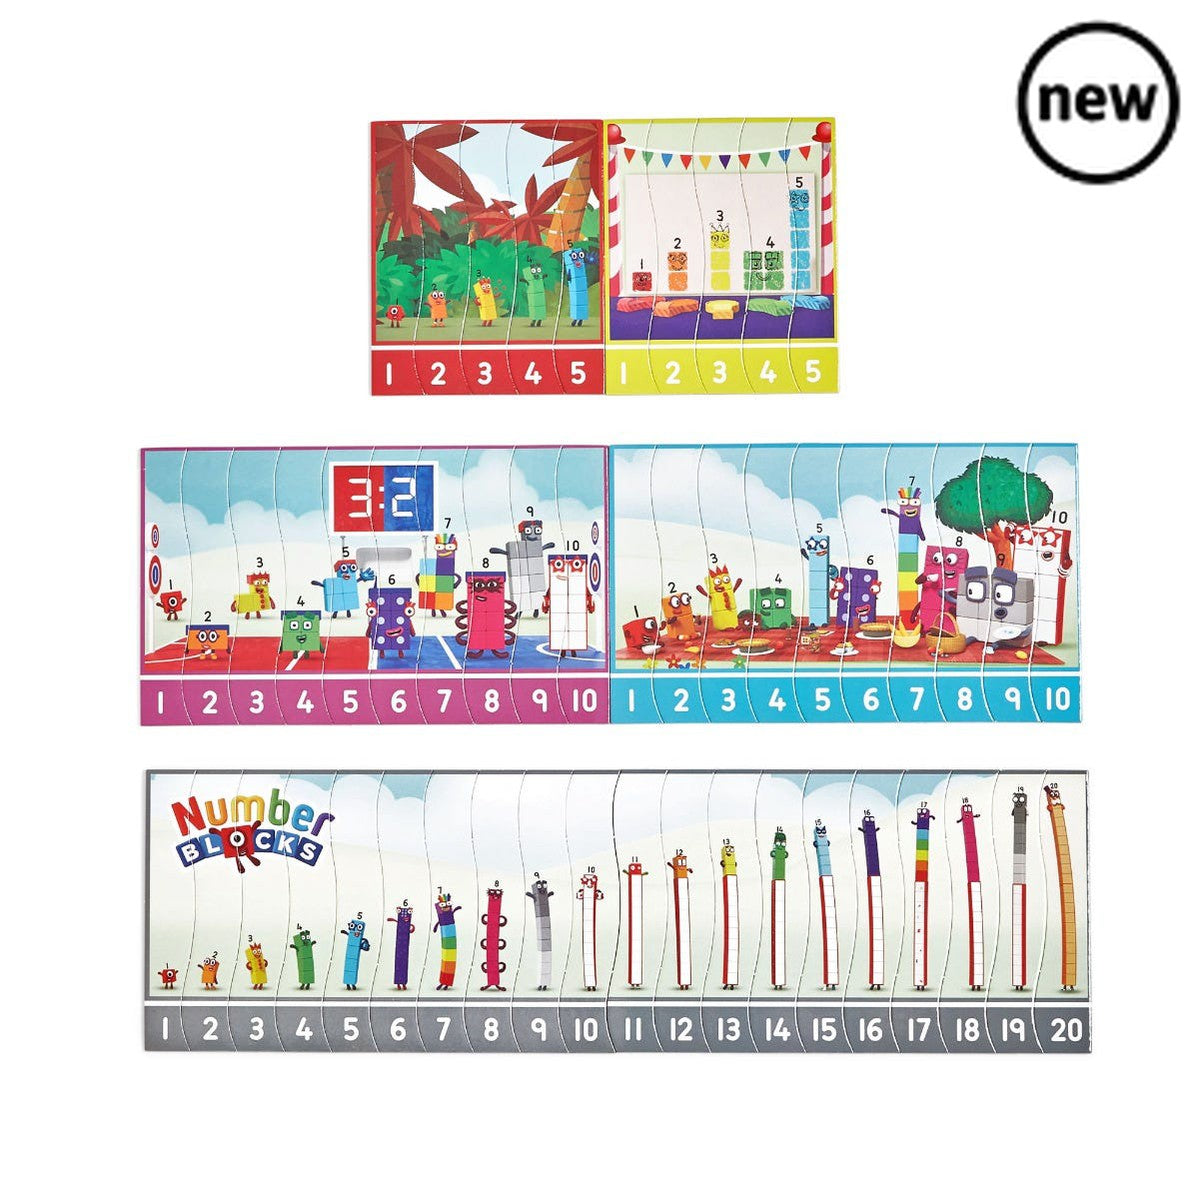 Numberblocks Sequencing Puzzle Set, Count on the Numberblocks One to Twenty to help little ones learn how to sequence numbers in the right order. There are 10 double-sided Numberblocks jigsaw puzzles featuring the friendly Numberblocks One to Twenty. There are 4 each for 1–5 and 1–10, and 2 for numbers 1–20. Each Numberblocks puzzle is colour-coded, and features a number line, which helps children compare numbers as they order them in the correct sequence. Perfect for learning through puzzle play at home or